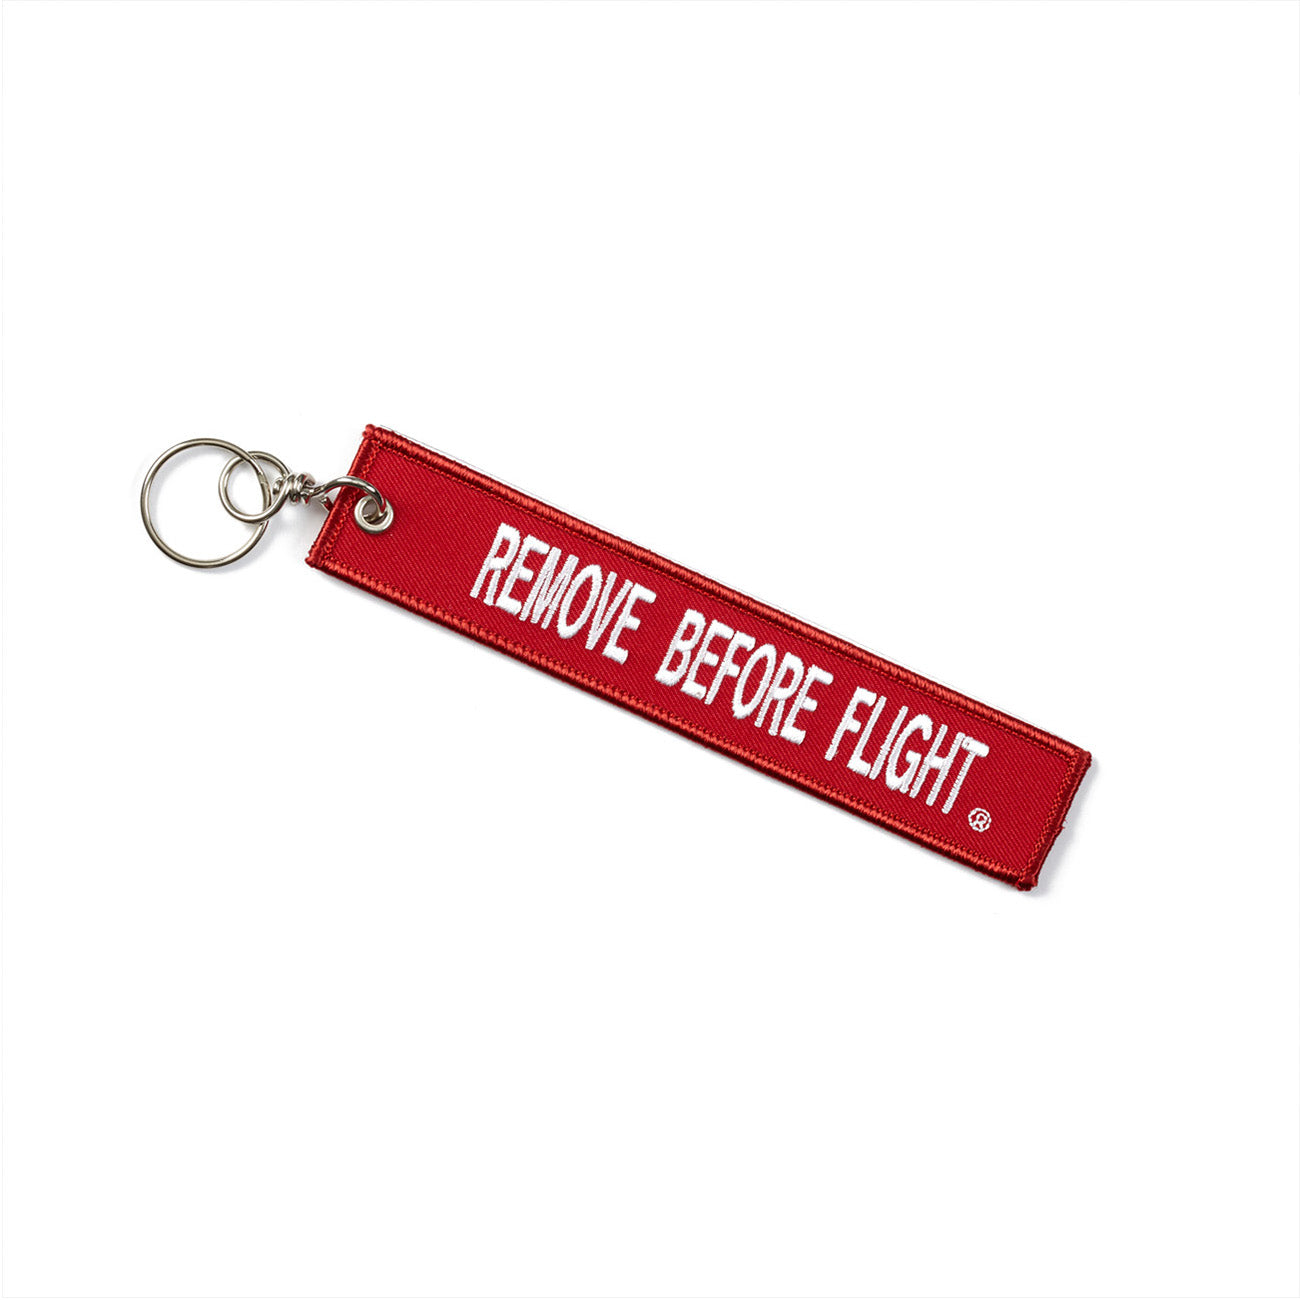 What Are The Remove Before Flight Tags On The Aircraft For? - BAA  Training Vietnam